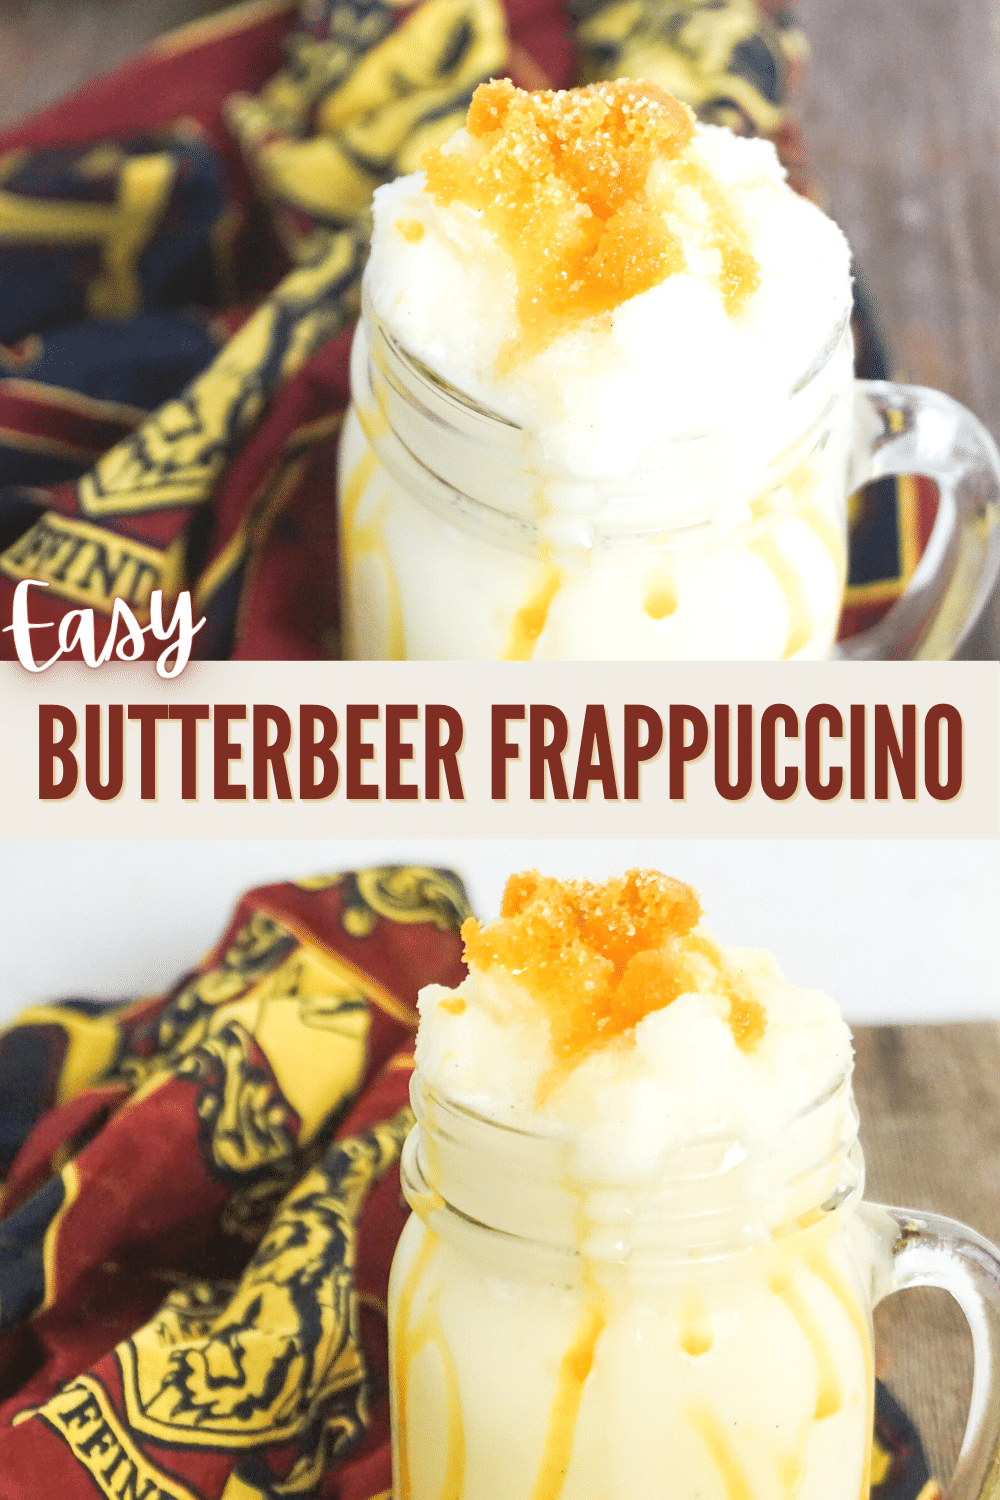 This homemade butterbeer frappuccino is the perfect drink for all the Potterheads out there! This secret recipe is the best! #butterbeer #frappuccino #butterbeerfrappuccino #harrypotter via @wondermomwannab